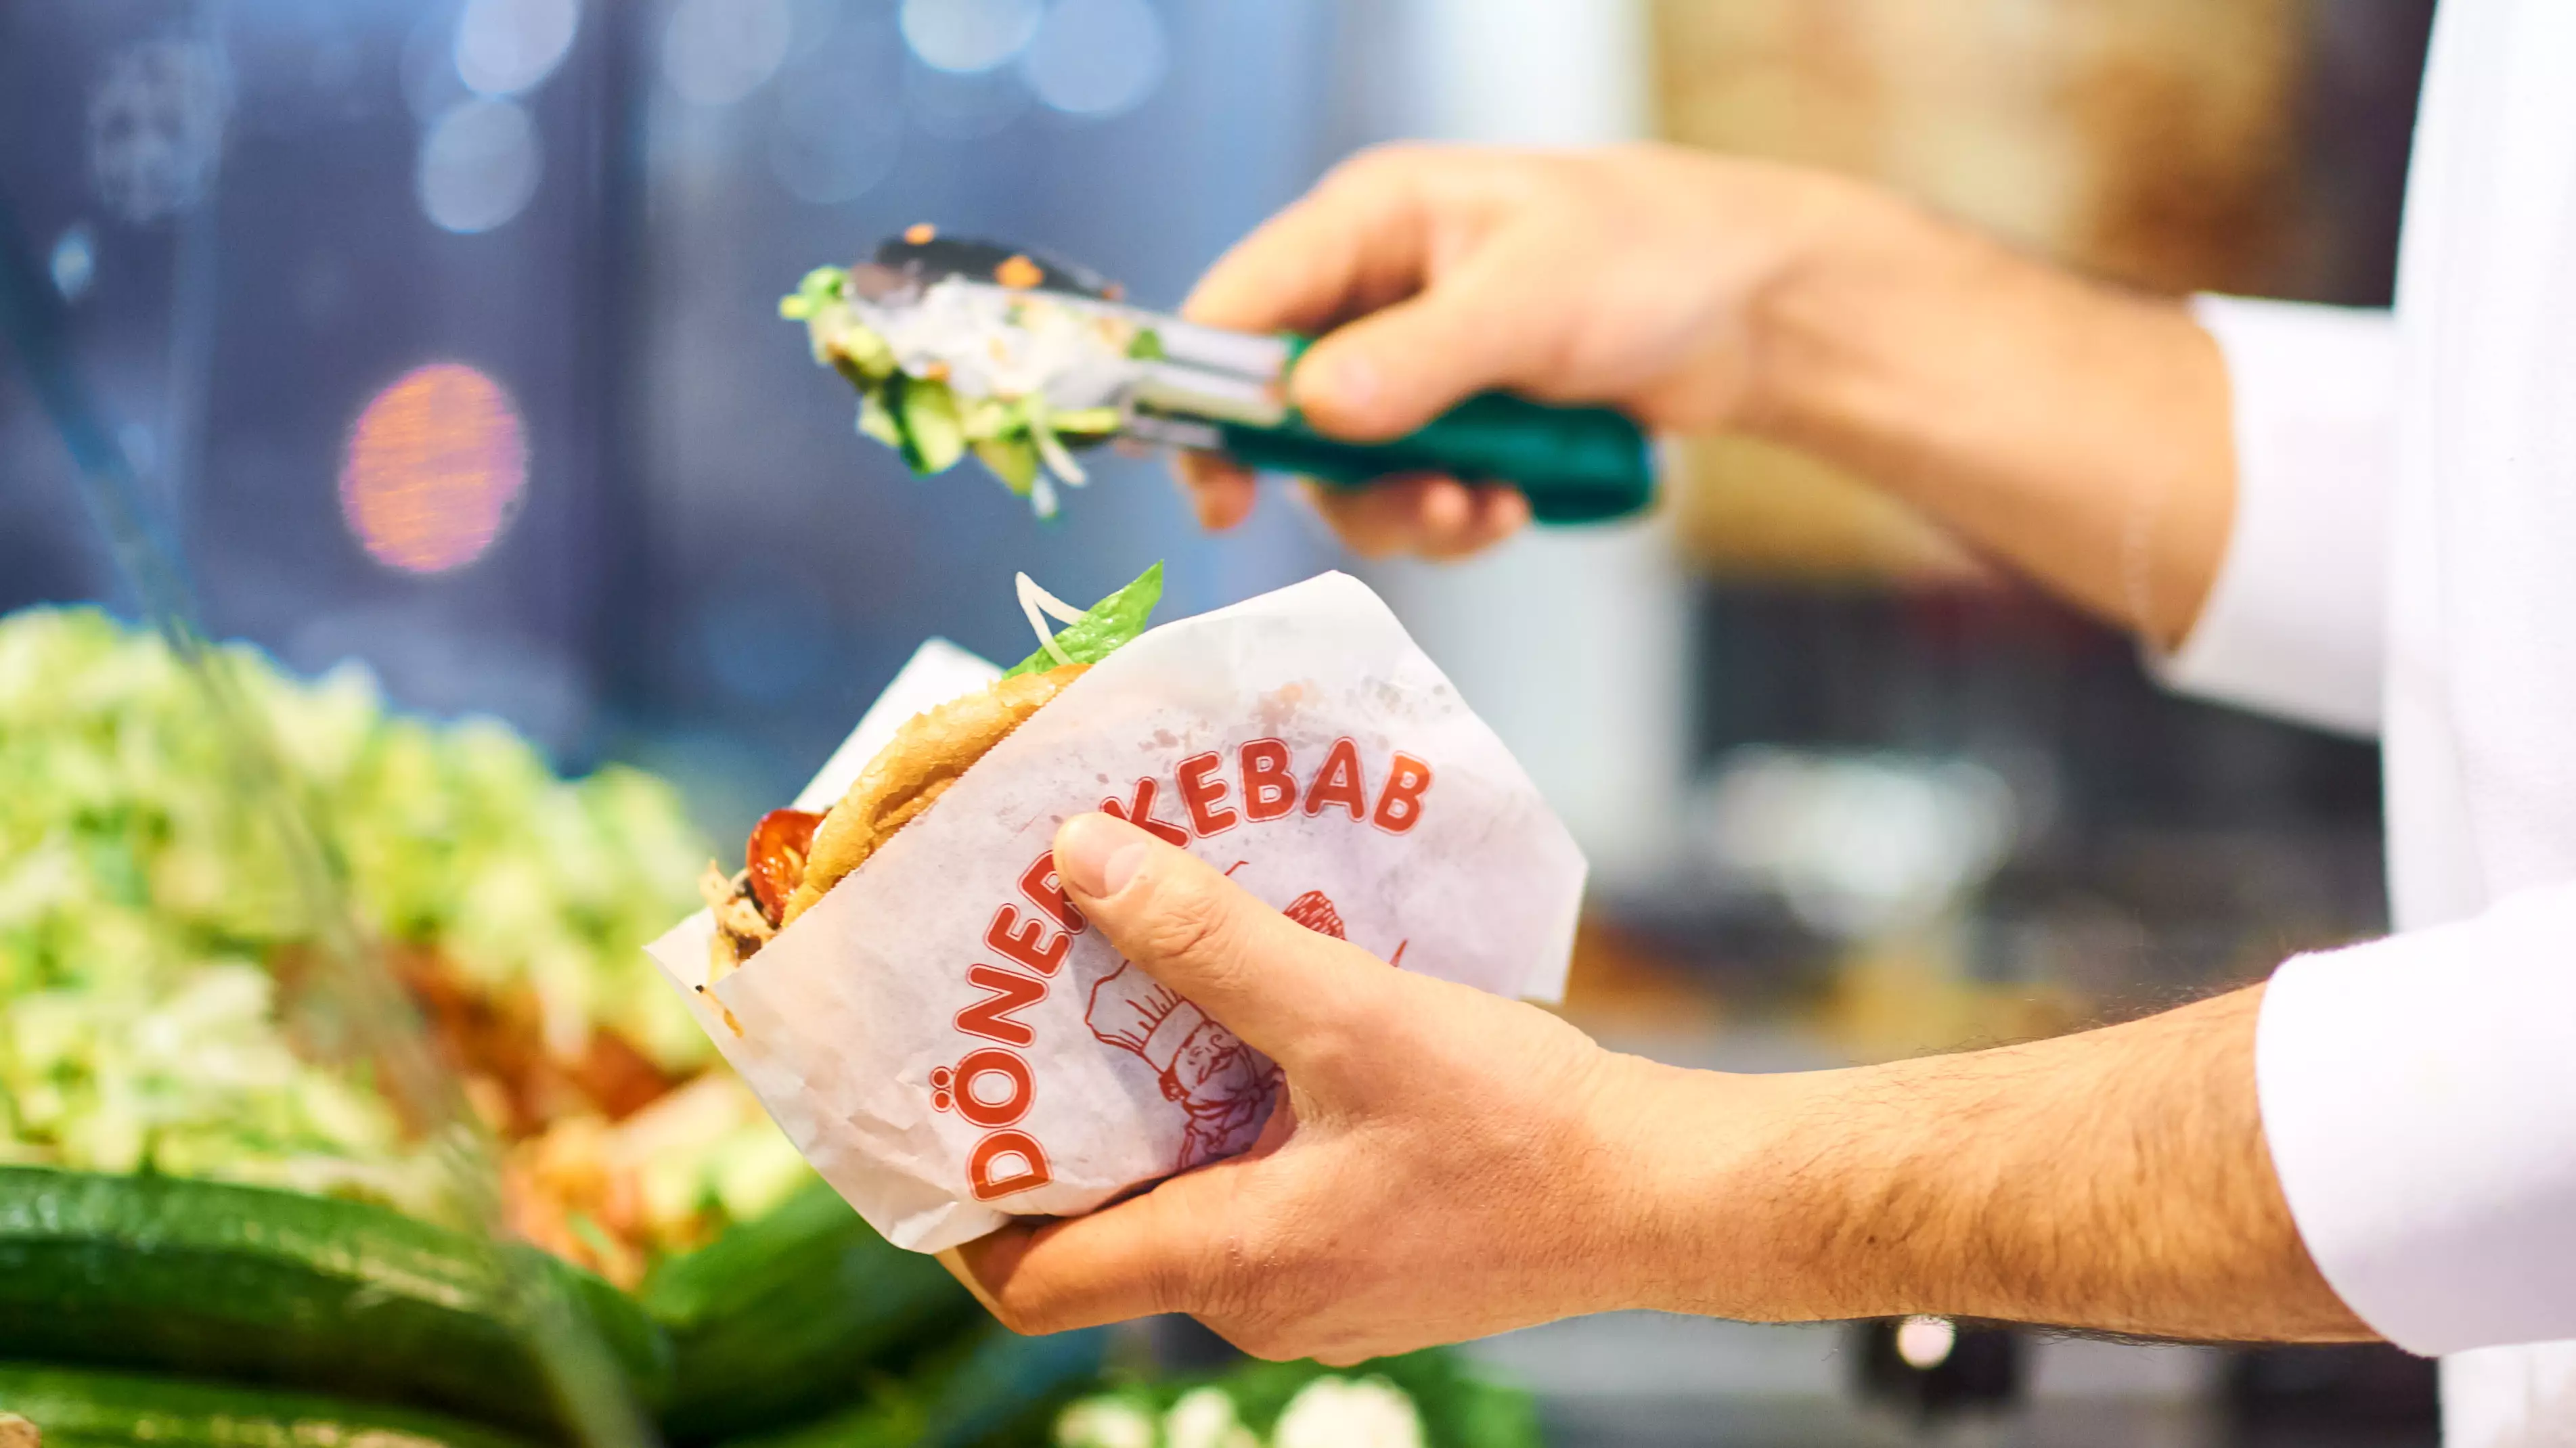 Uber Eats Is Giving Away Free Kebabs This Valentine’s Day